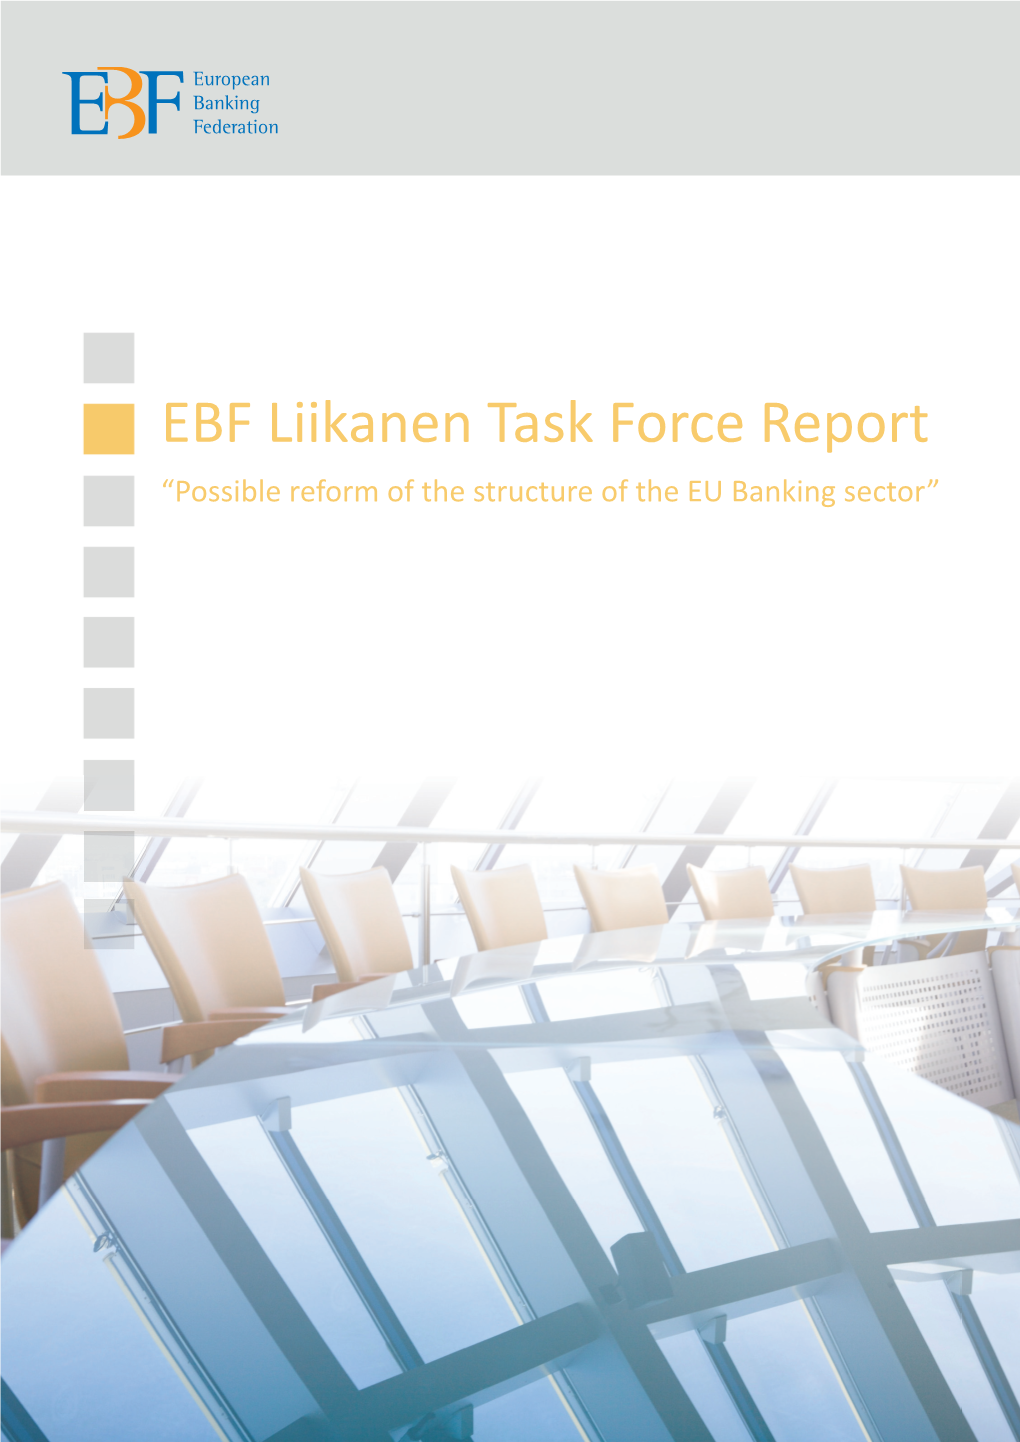 EBF Liikanen Task Force Report “Possible Reform of the Structure of the EU Banking Sector” Table of Contents